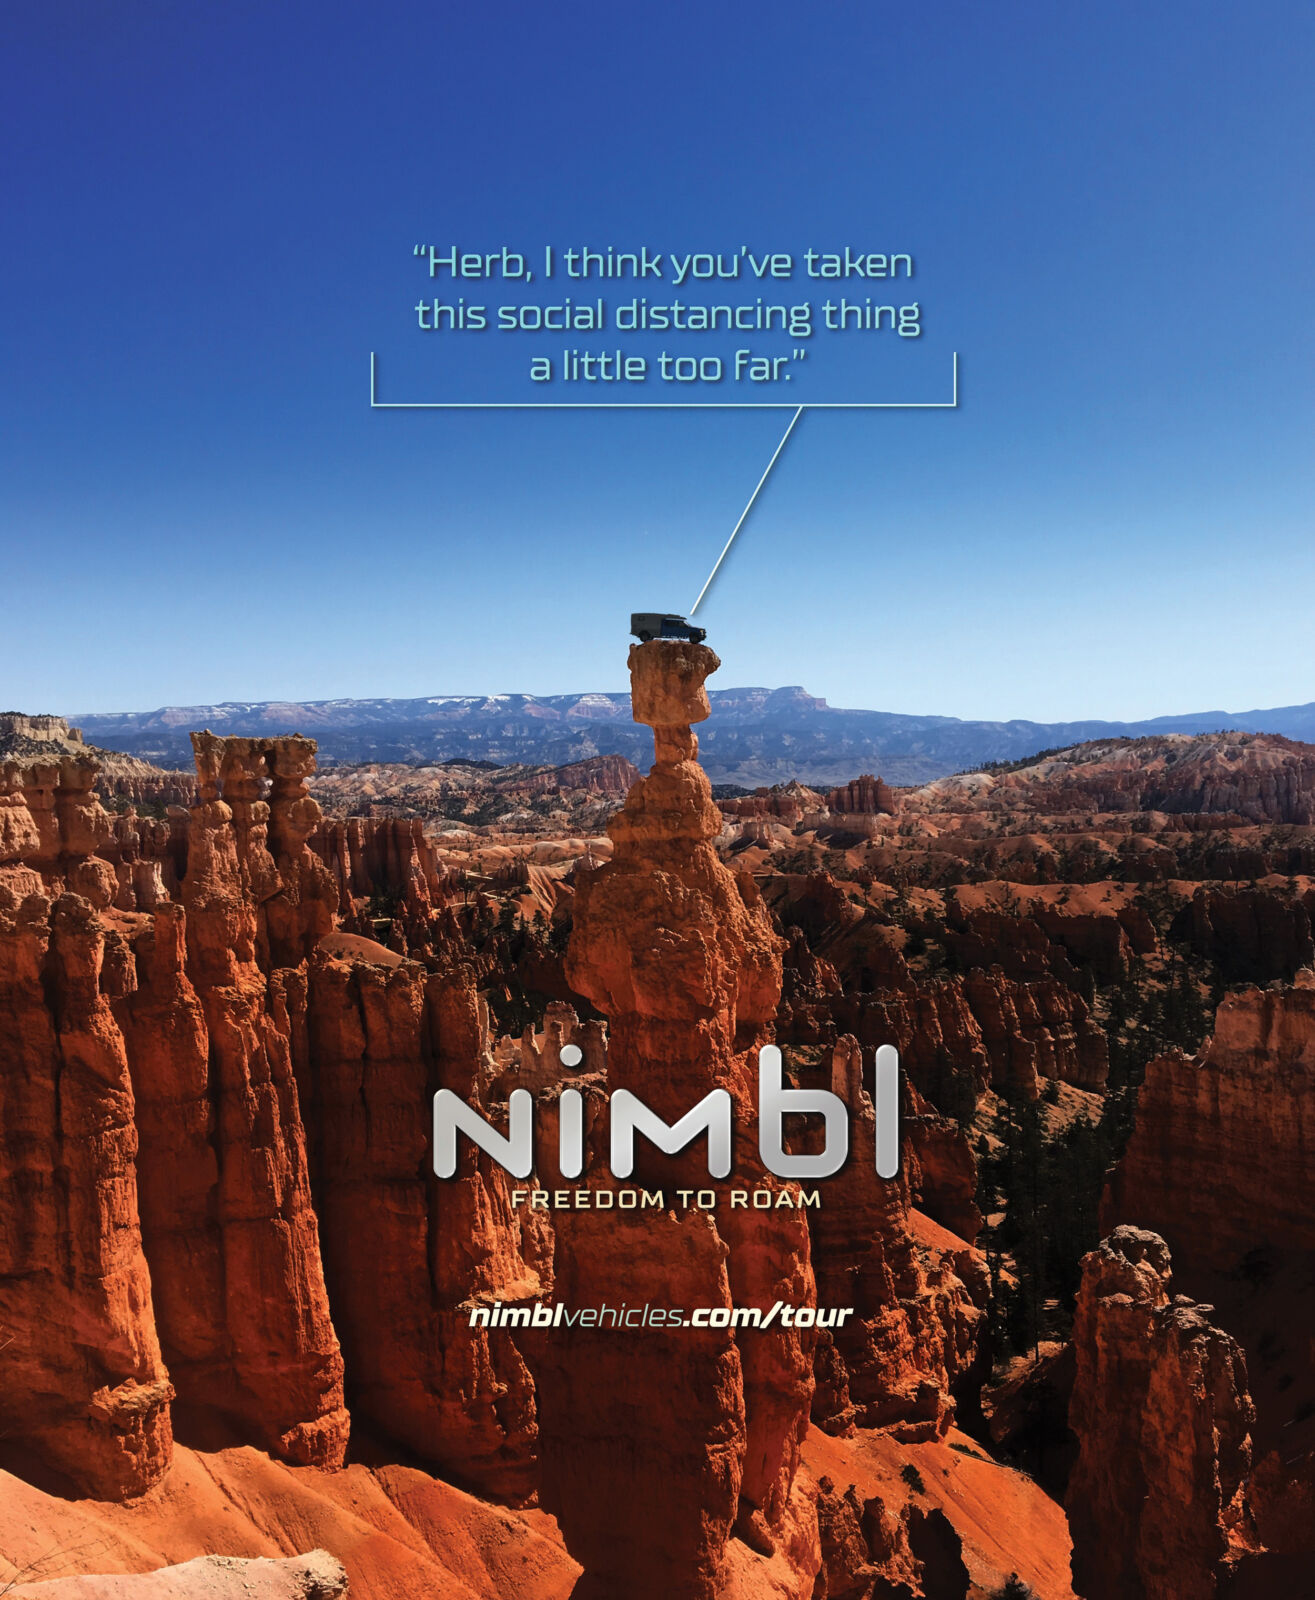 Social distancing shown as one of the best ads for Nimbl Vehicles